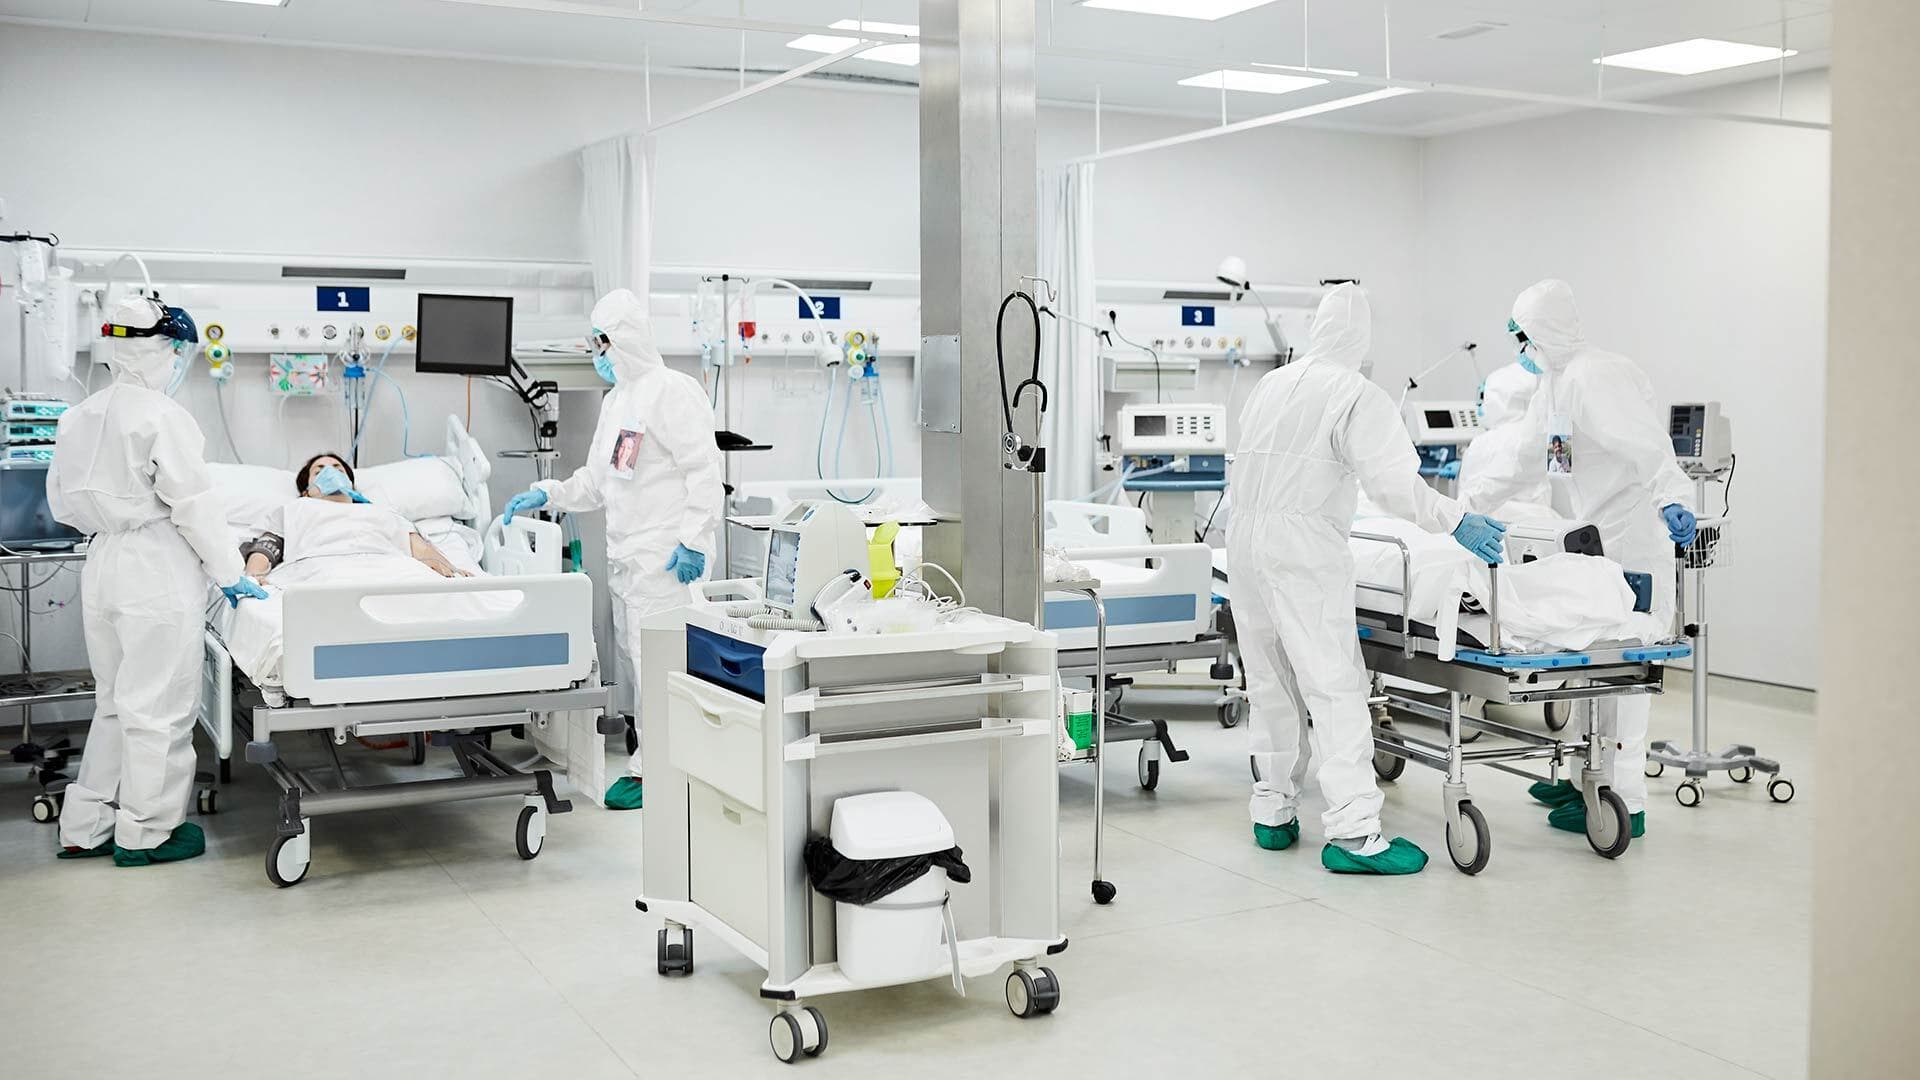 health care workers wear full suits to avoid infenction in ICU